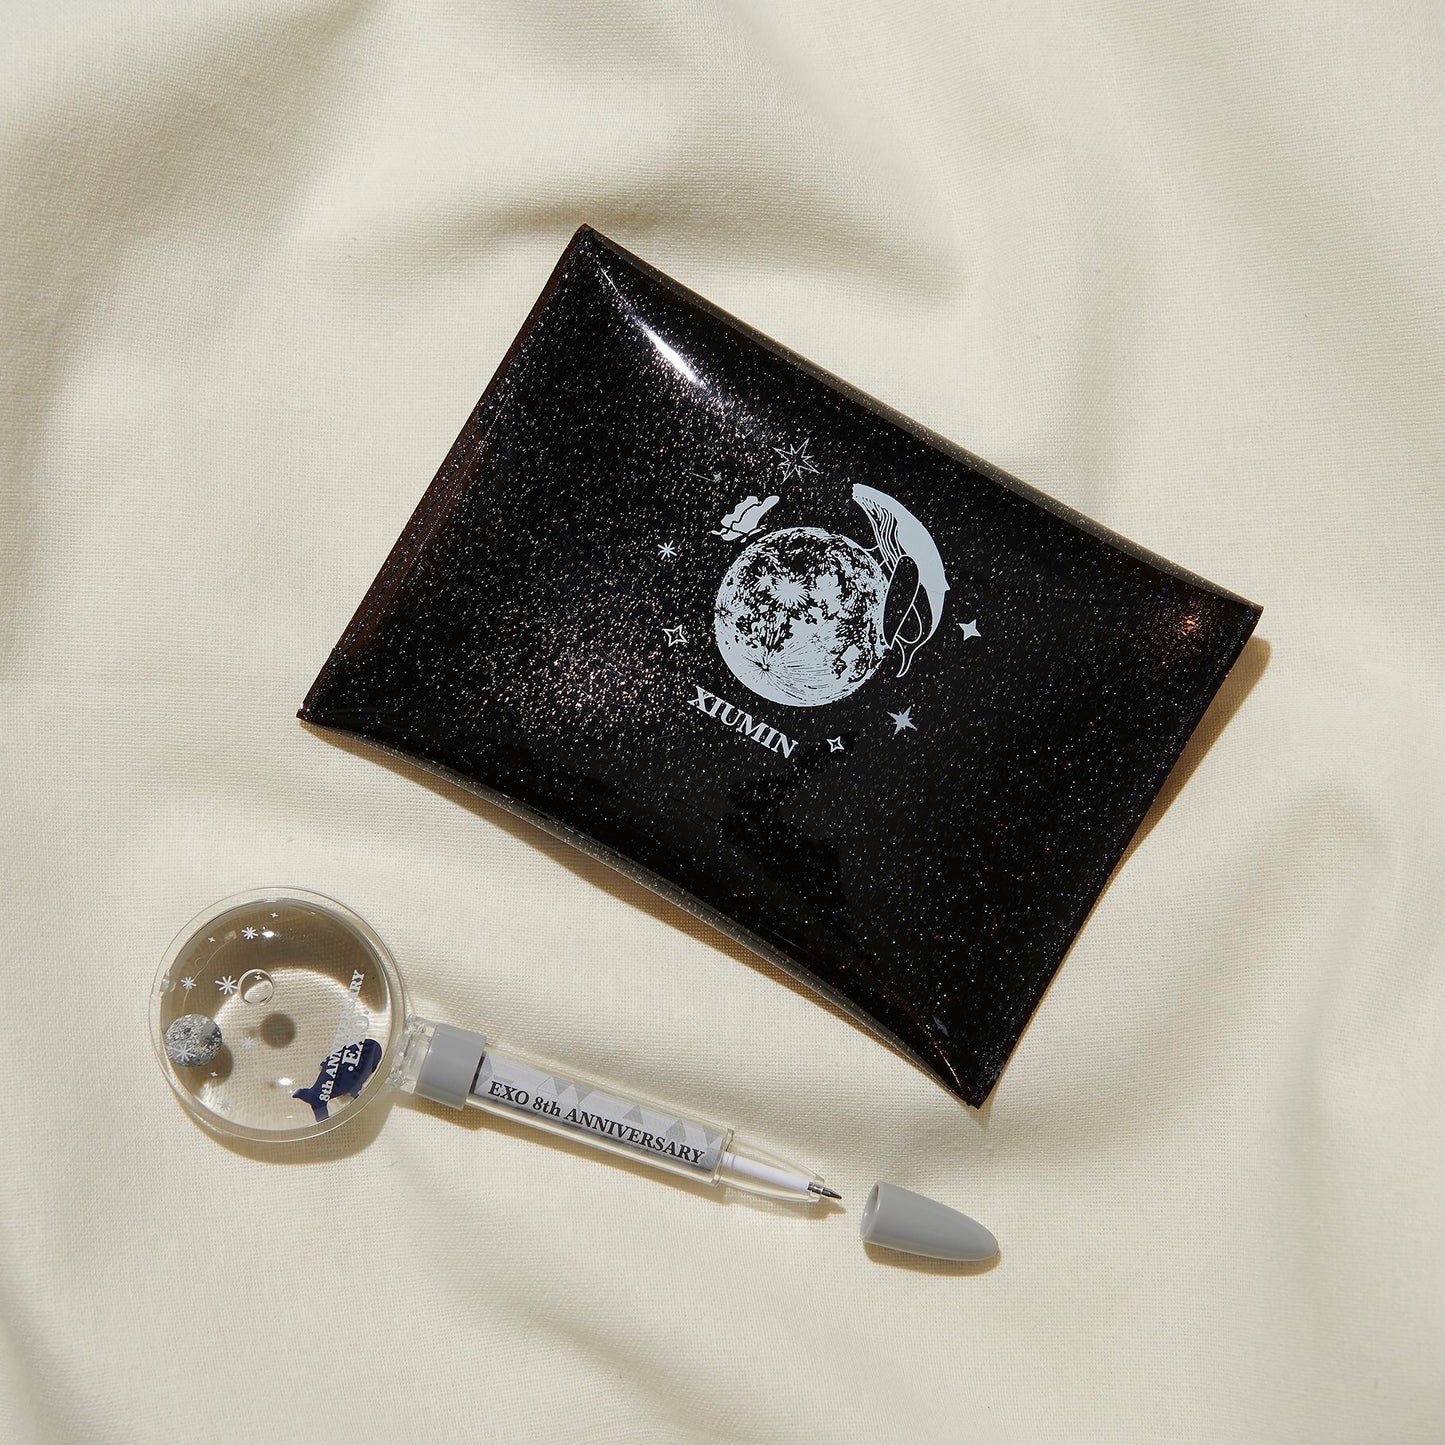 [EXO] Debut 8th Anniversary : Water Ball Pen + Pouch